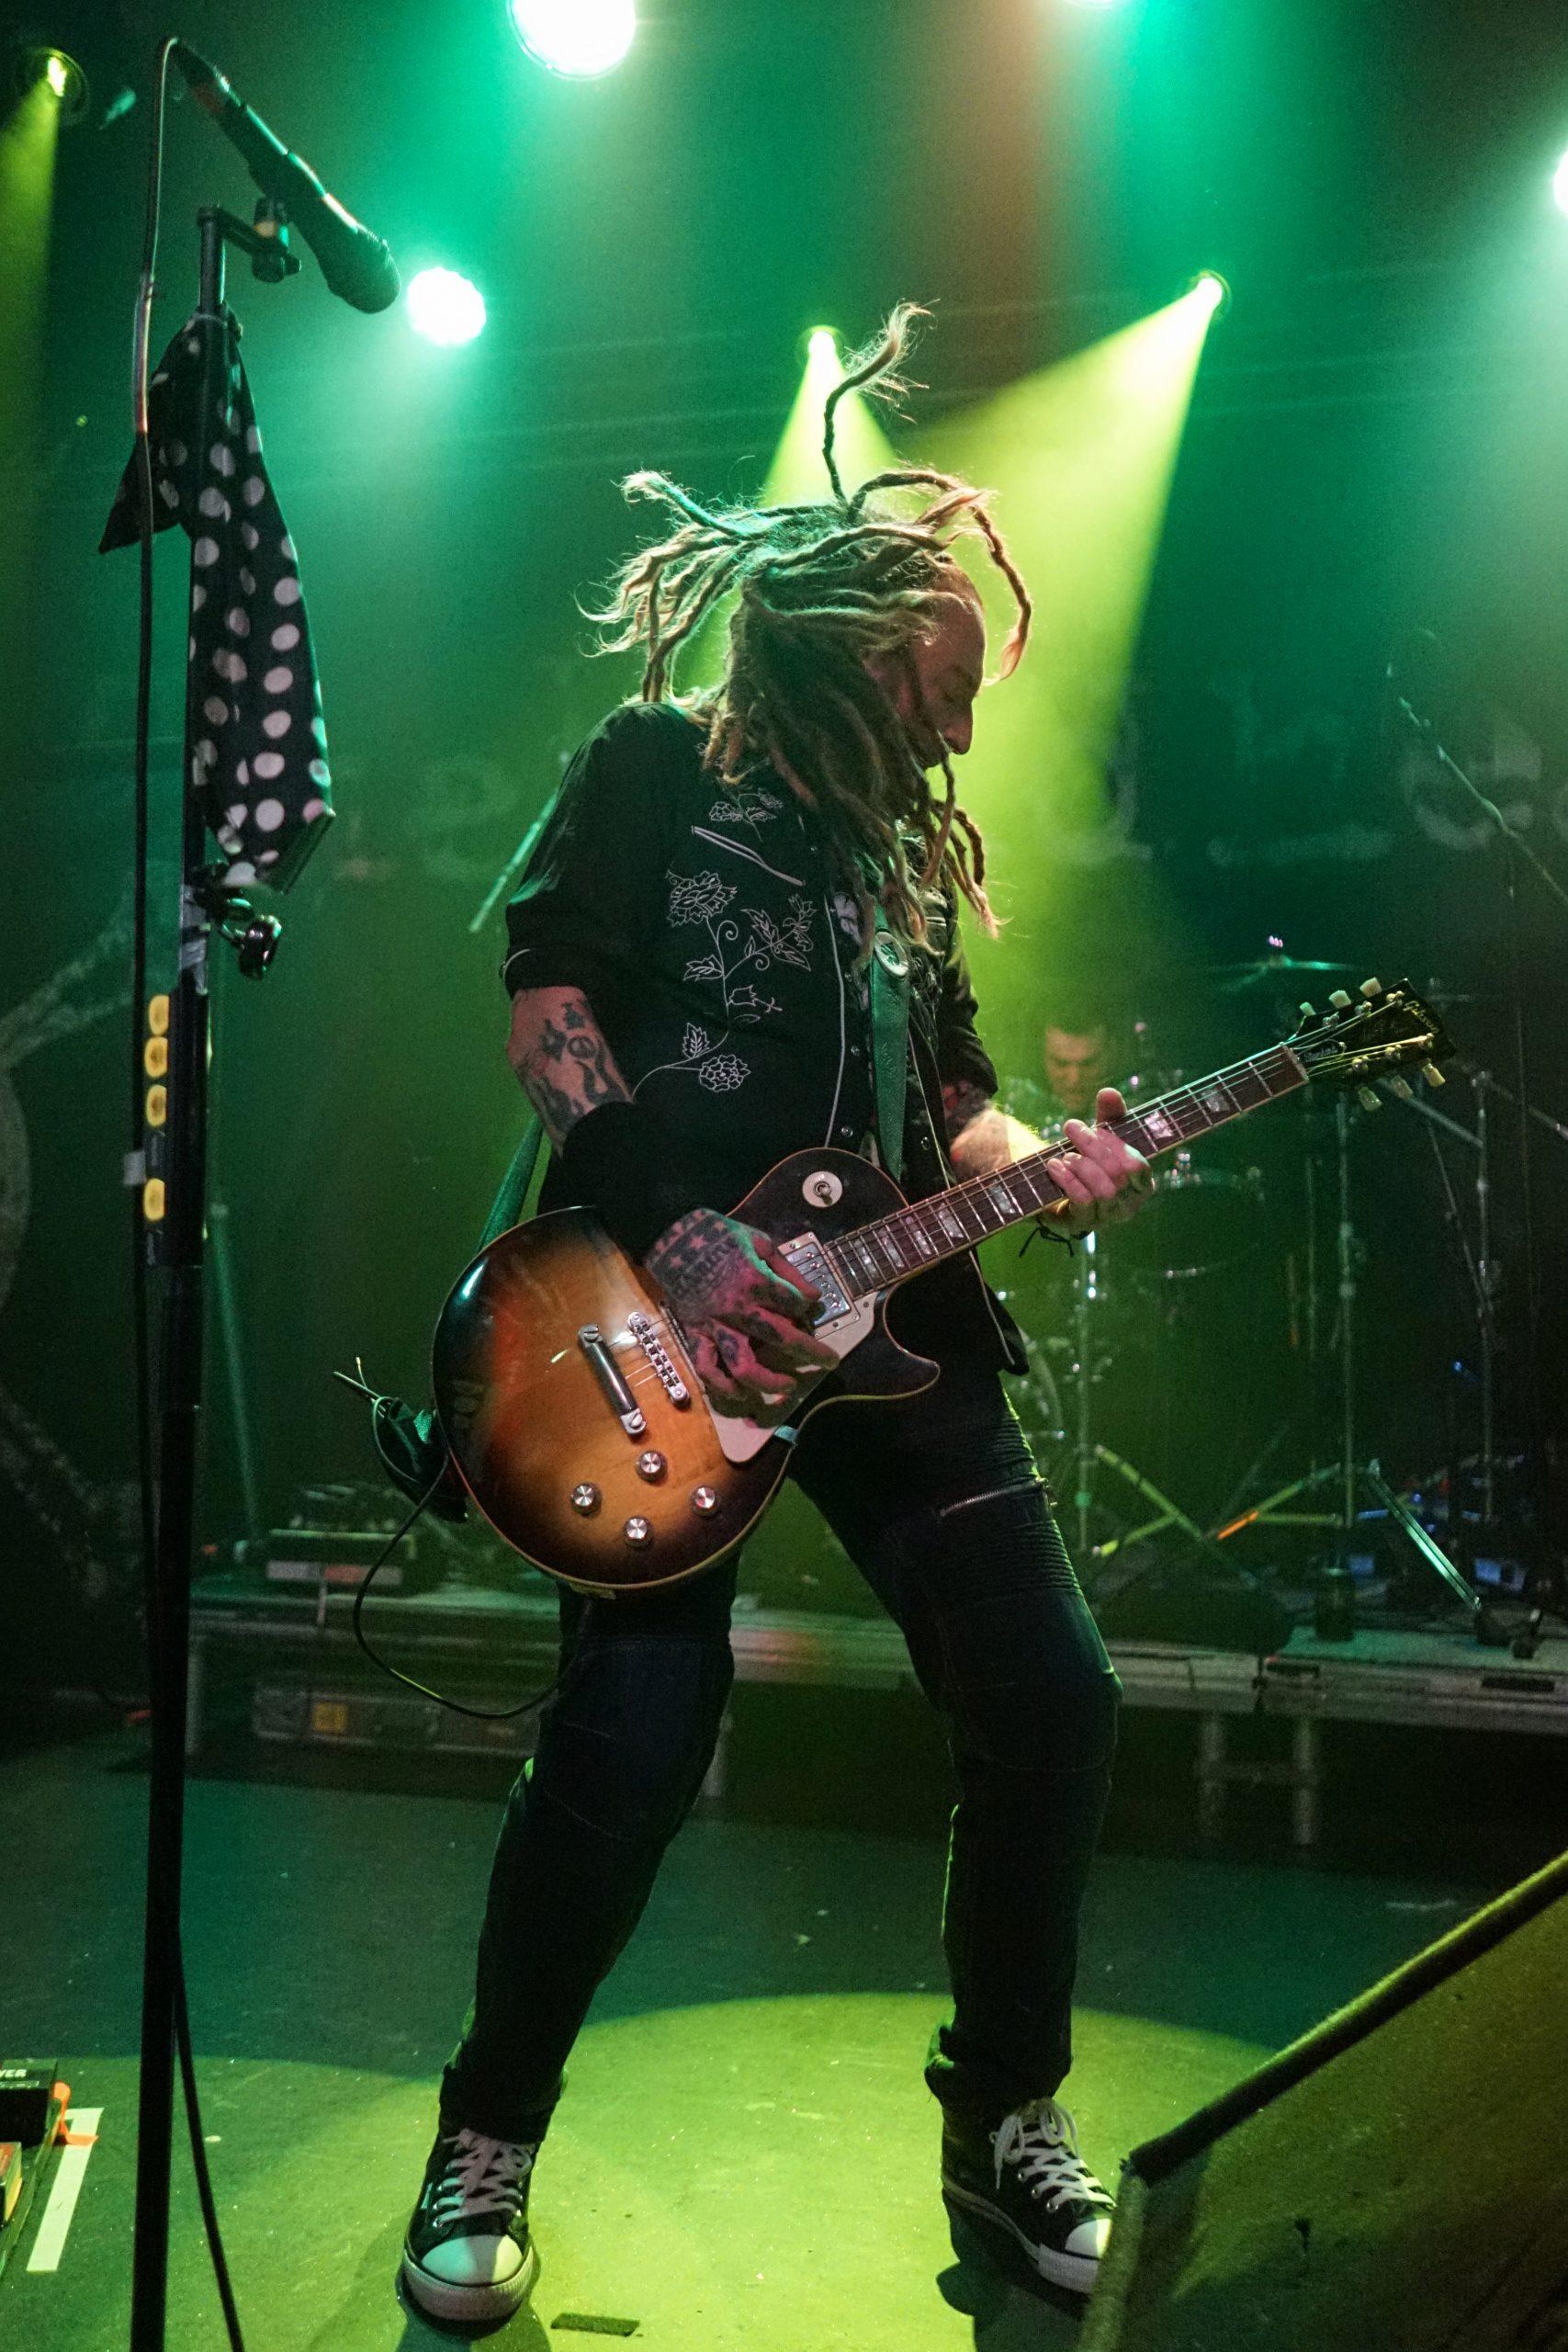 The Wildhearts Rock City gig review, with support from The Middlenight Men and Discharge.